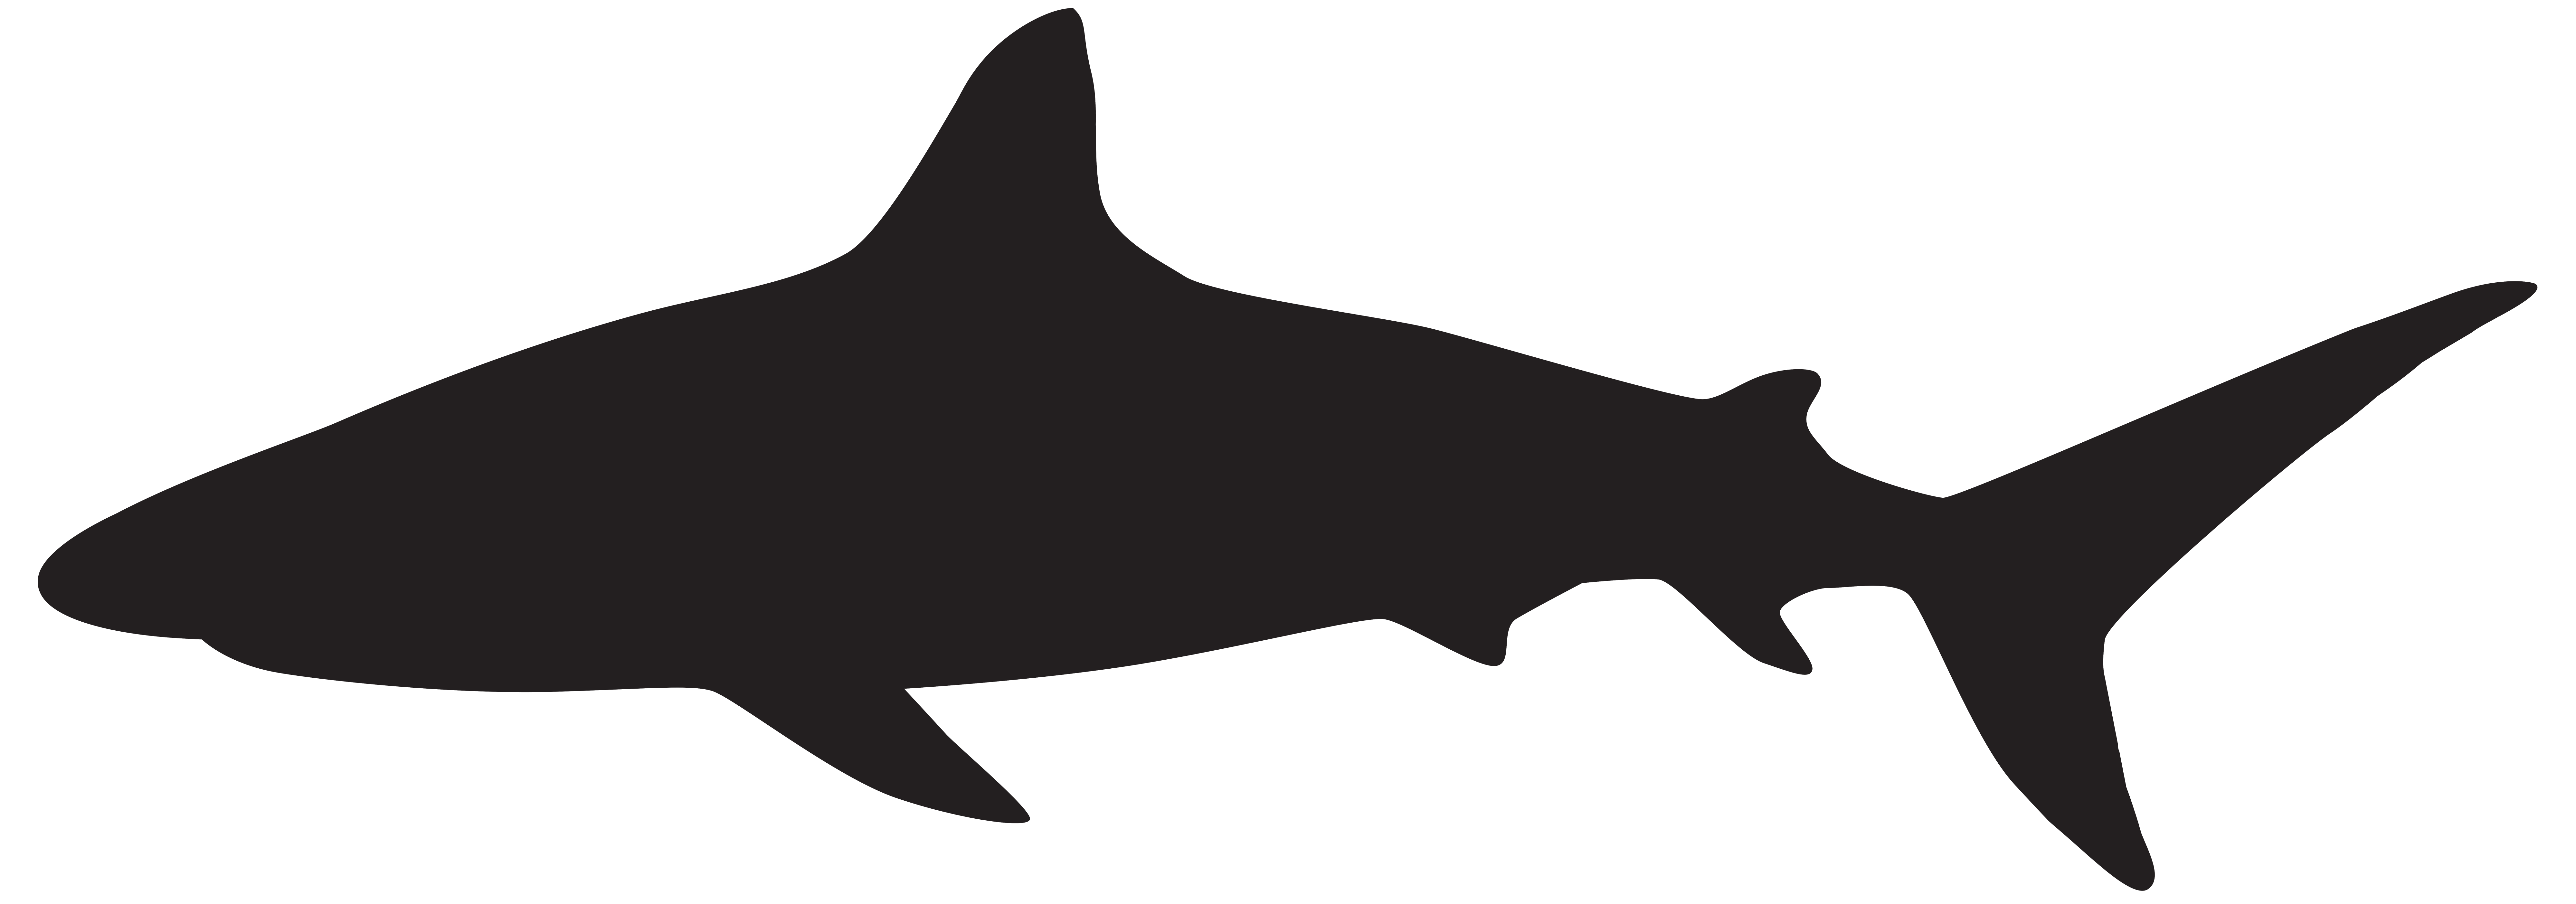 Shark silhouette png.